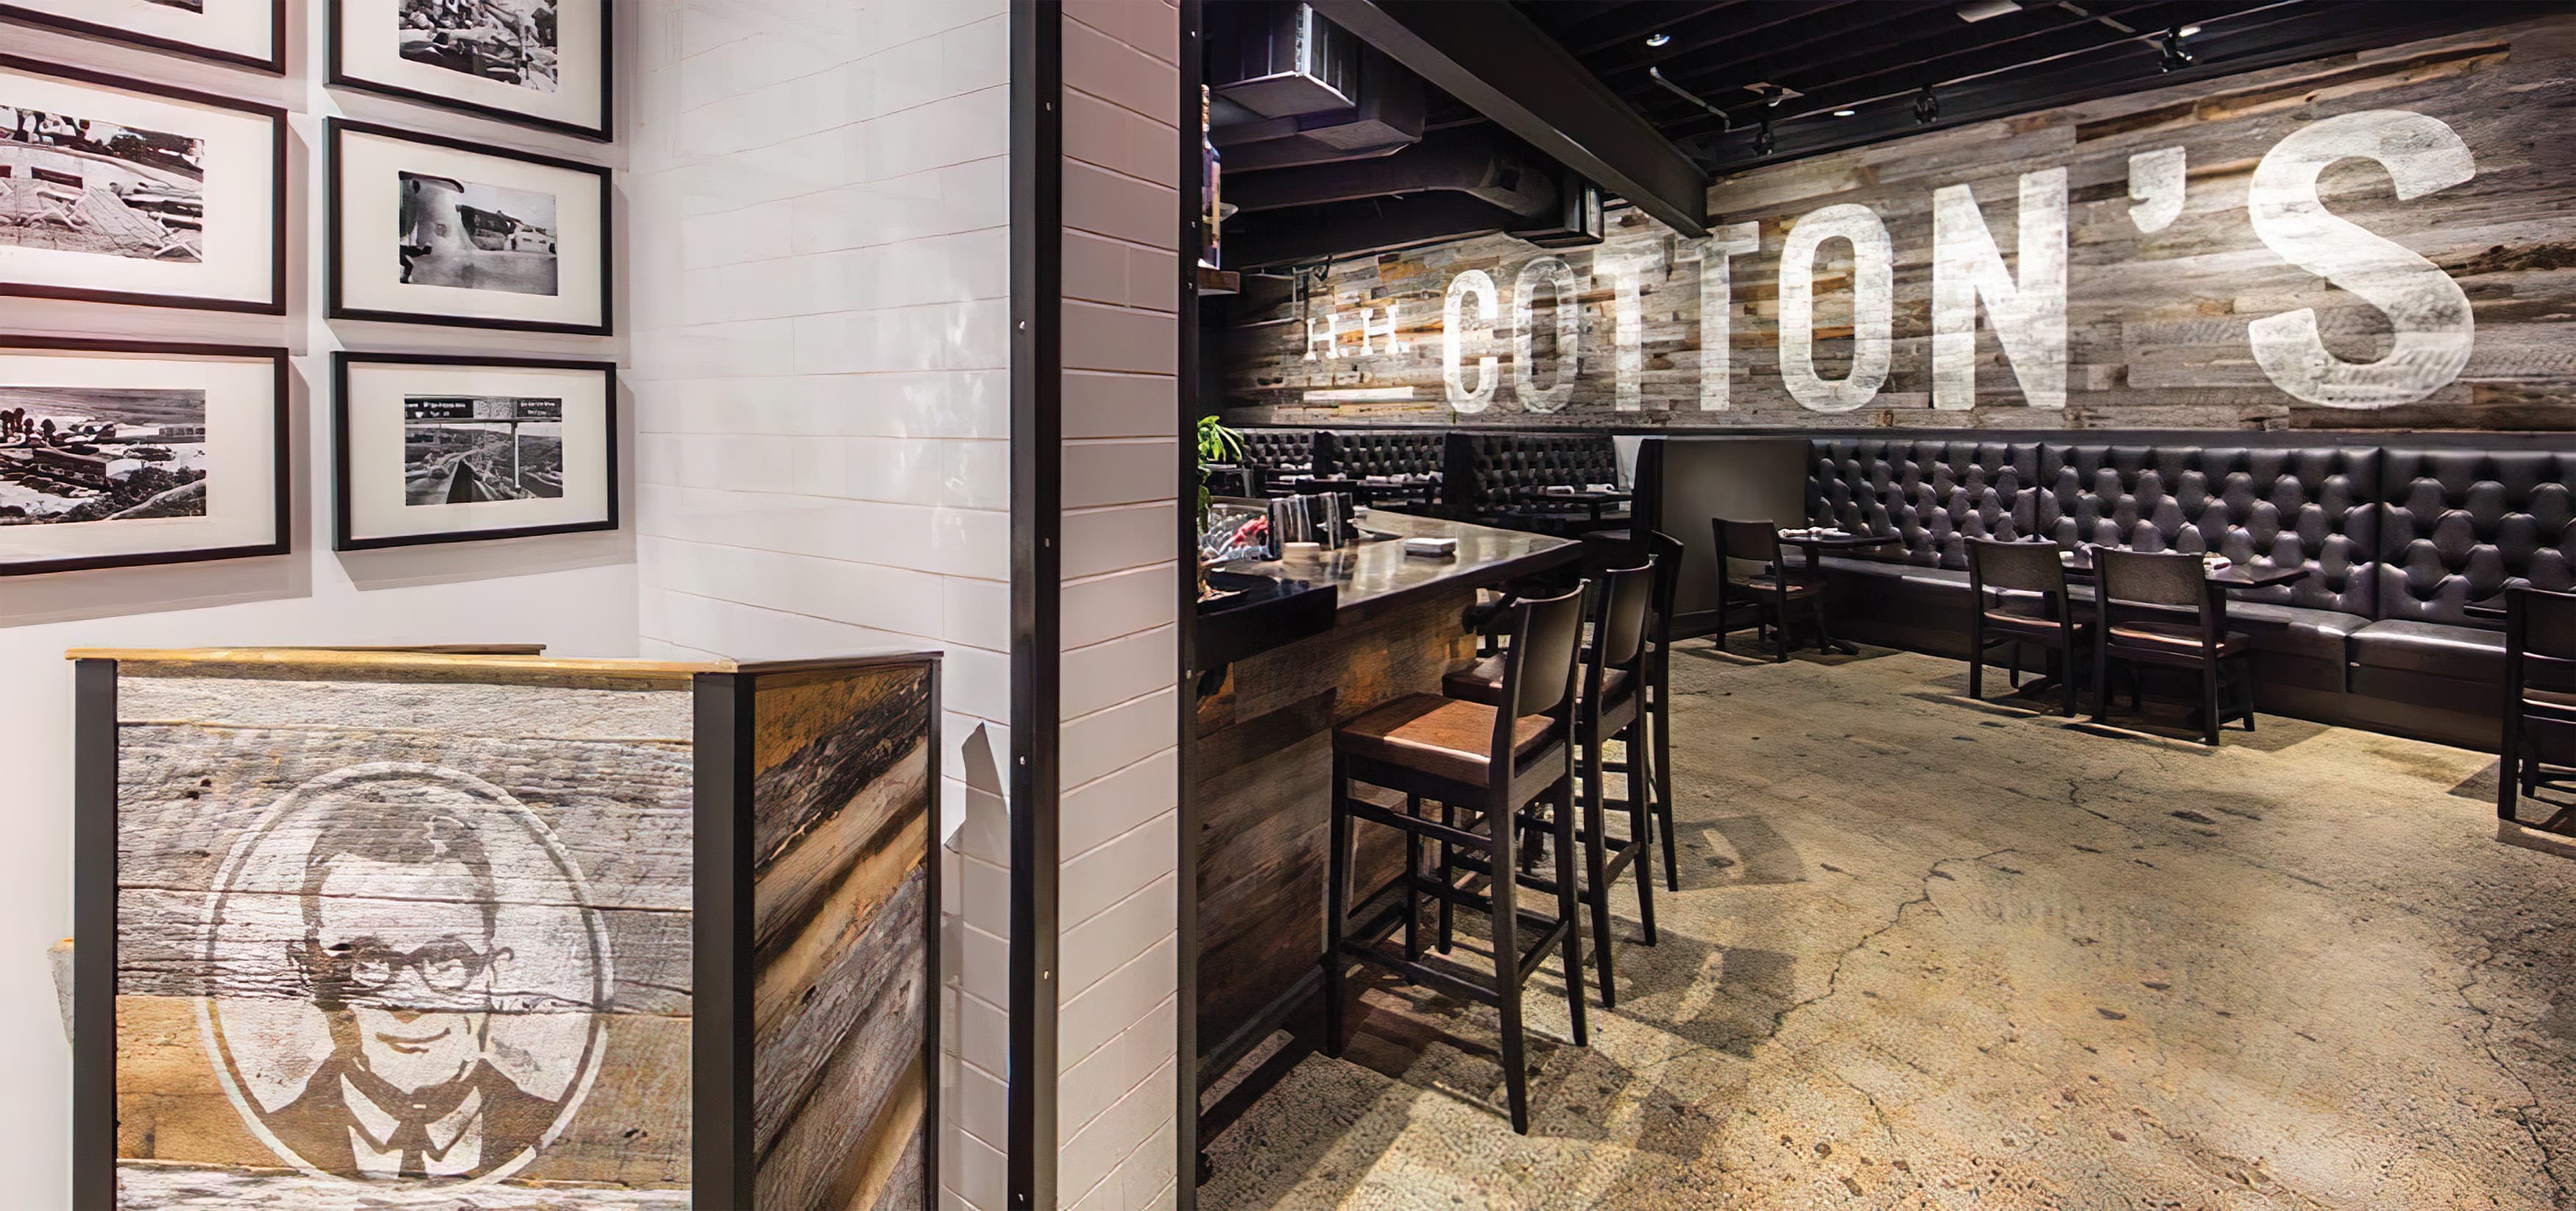 RSM Design worked with H.H. Cotton's, a restaurant in San Clemente, California to create a logo and brand identity as well as environmental graphics and signage.